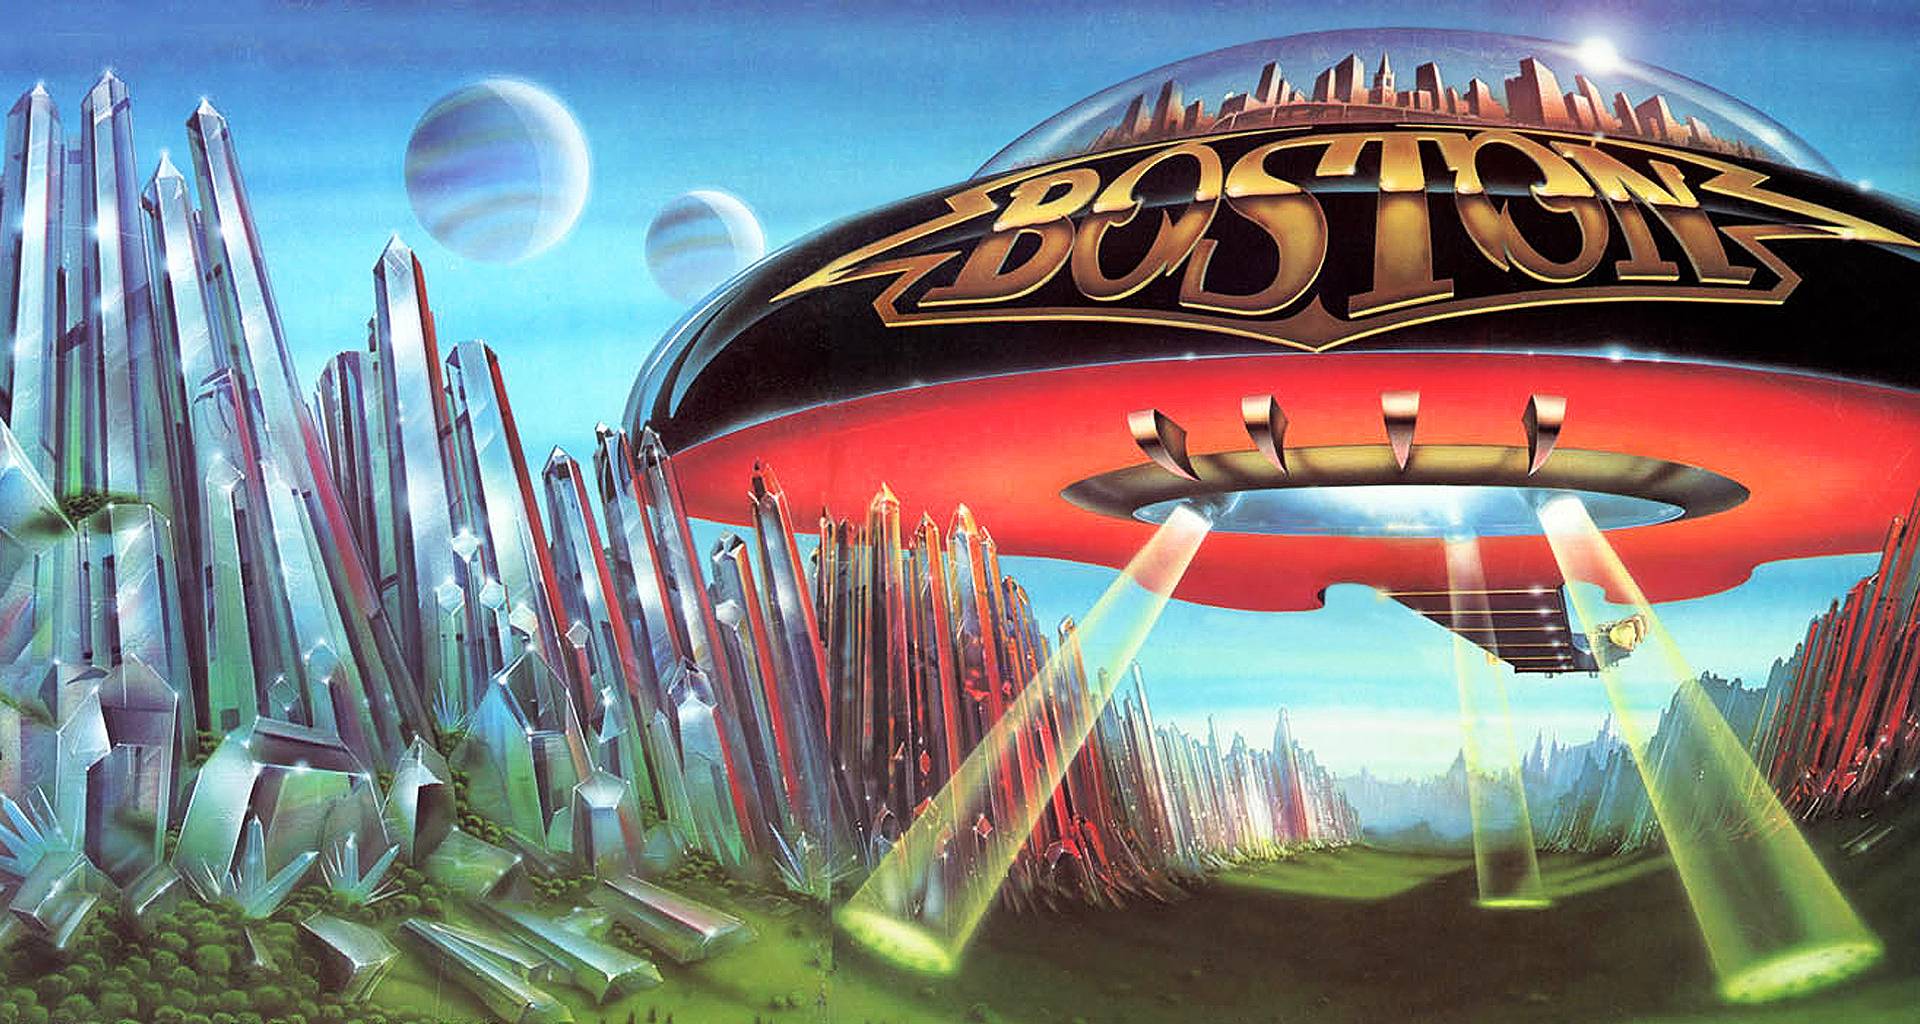 Boston S Don T Look Back Is An Excellent Underrated Album